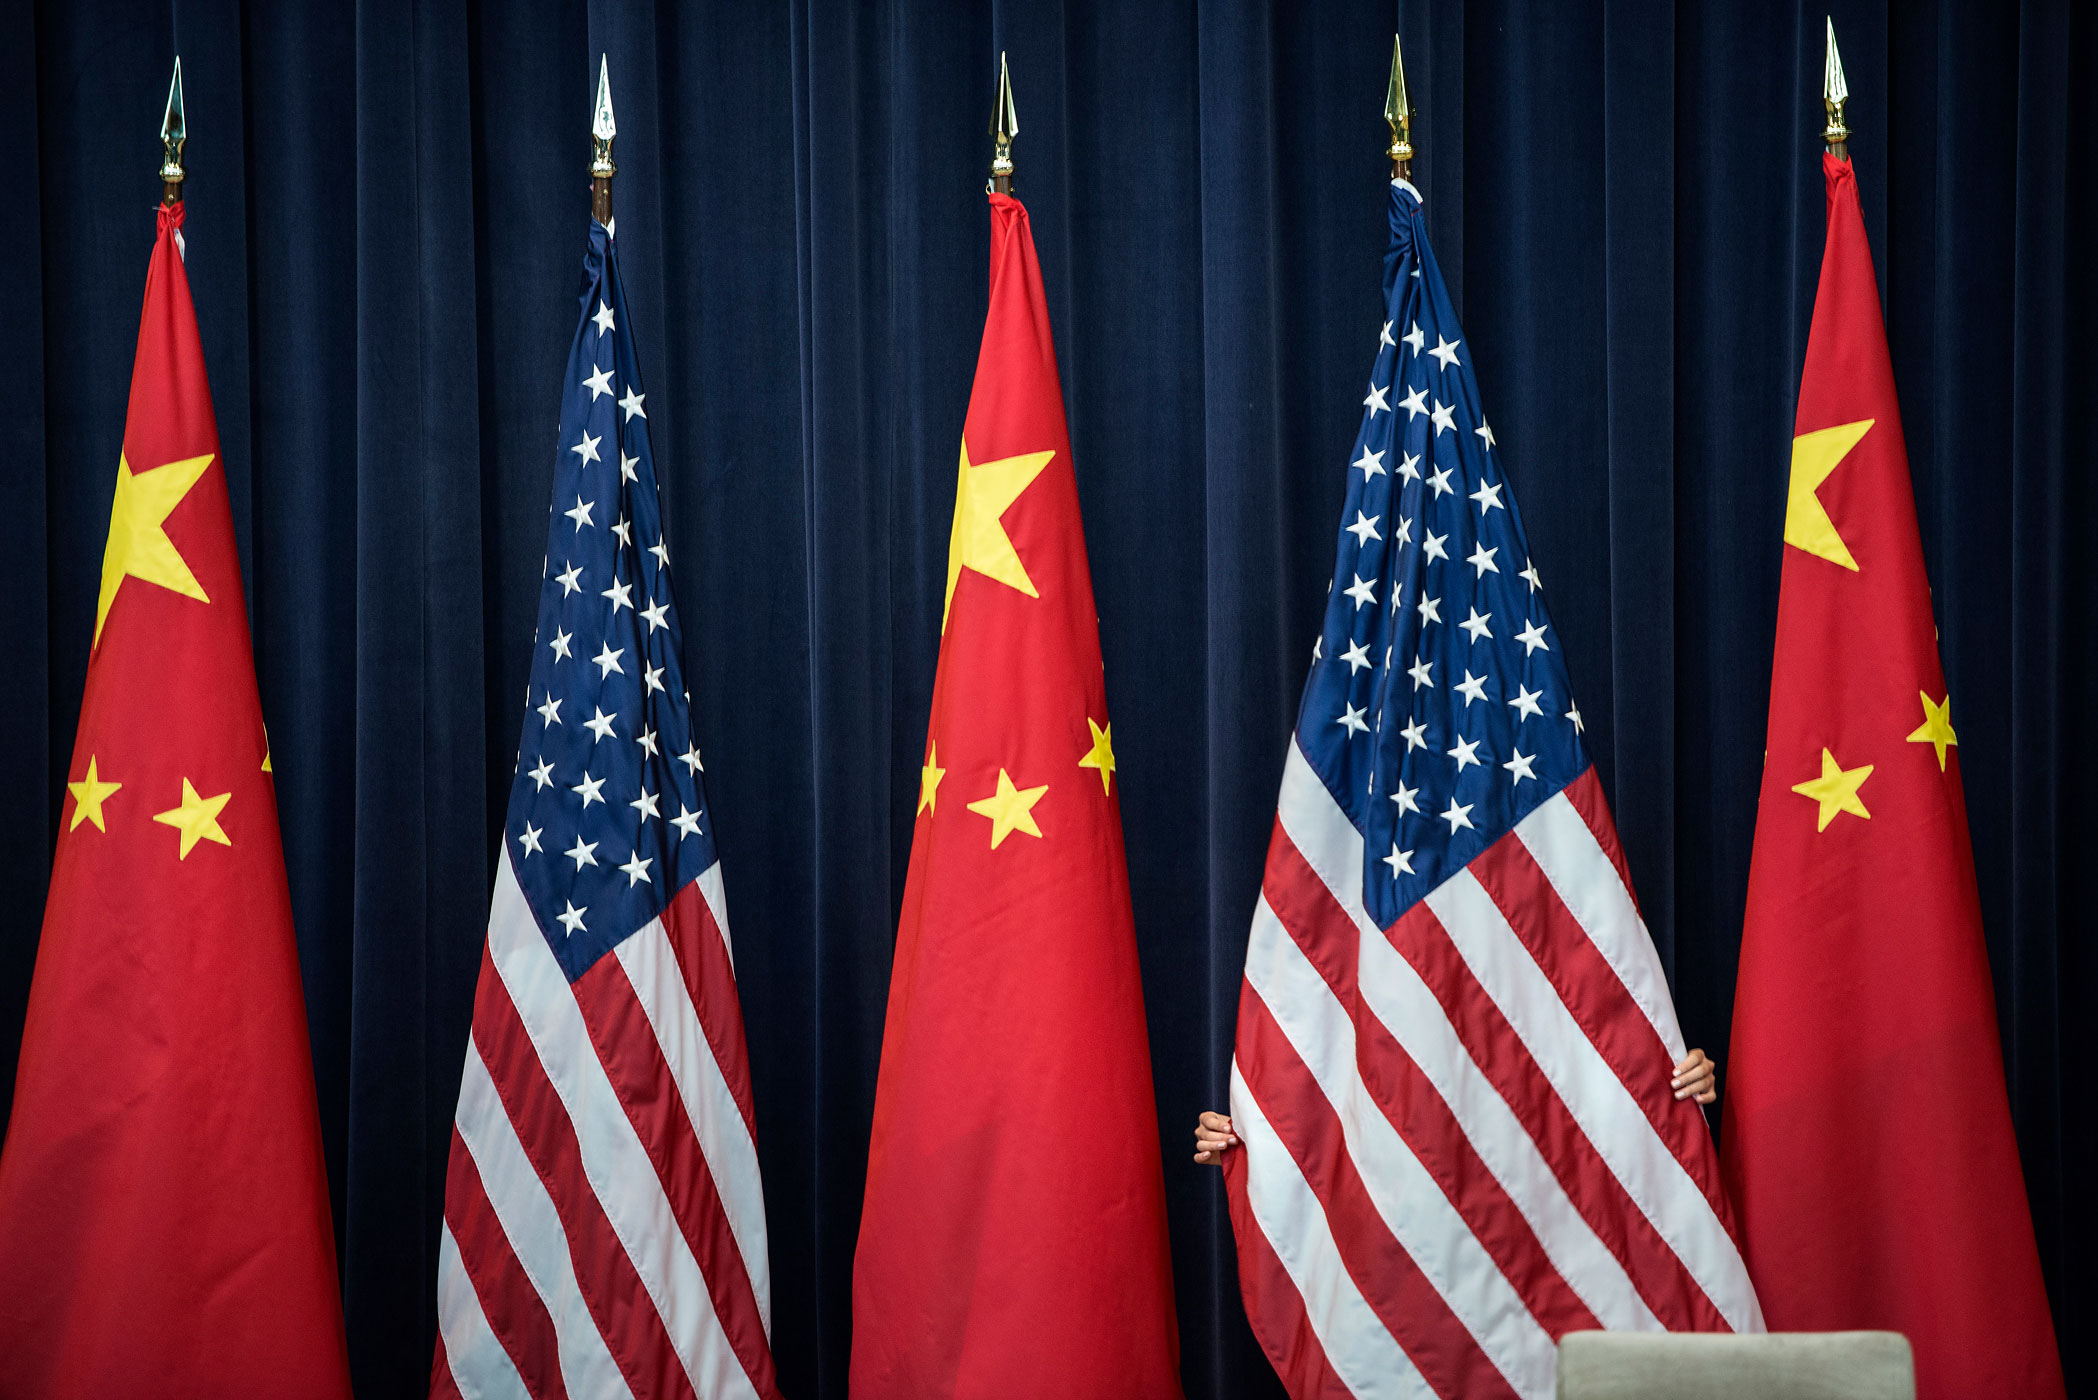 A staff member adjusts an American flag before the opening session of the U.S. and China Strategic and Economic Dialogue at the U.S. Department of State in Washington, July 10, 2013.